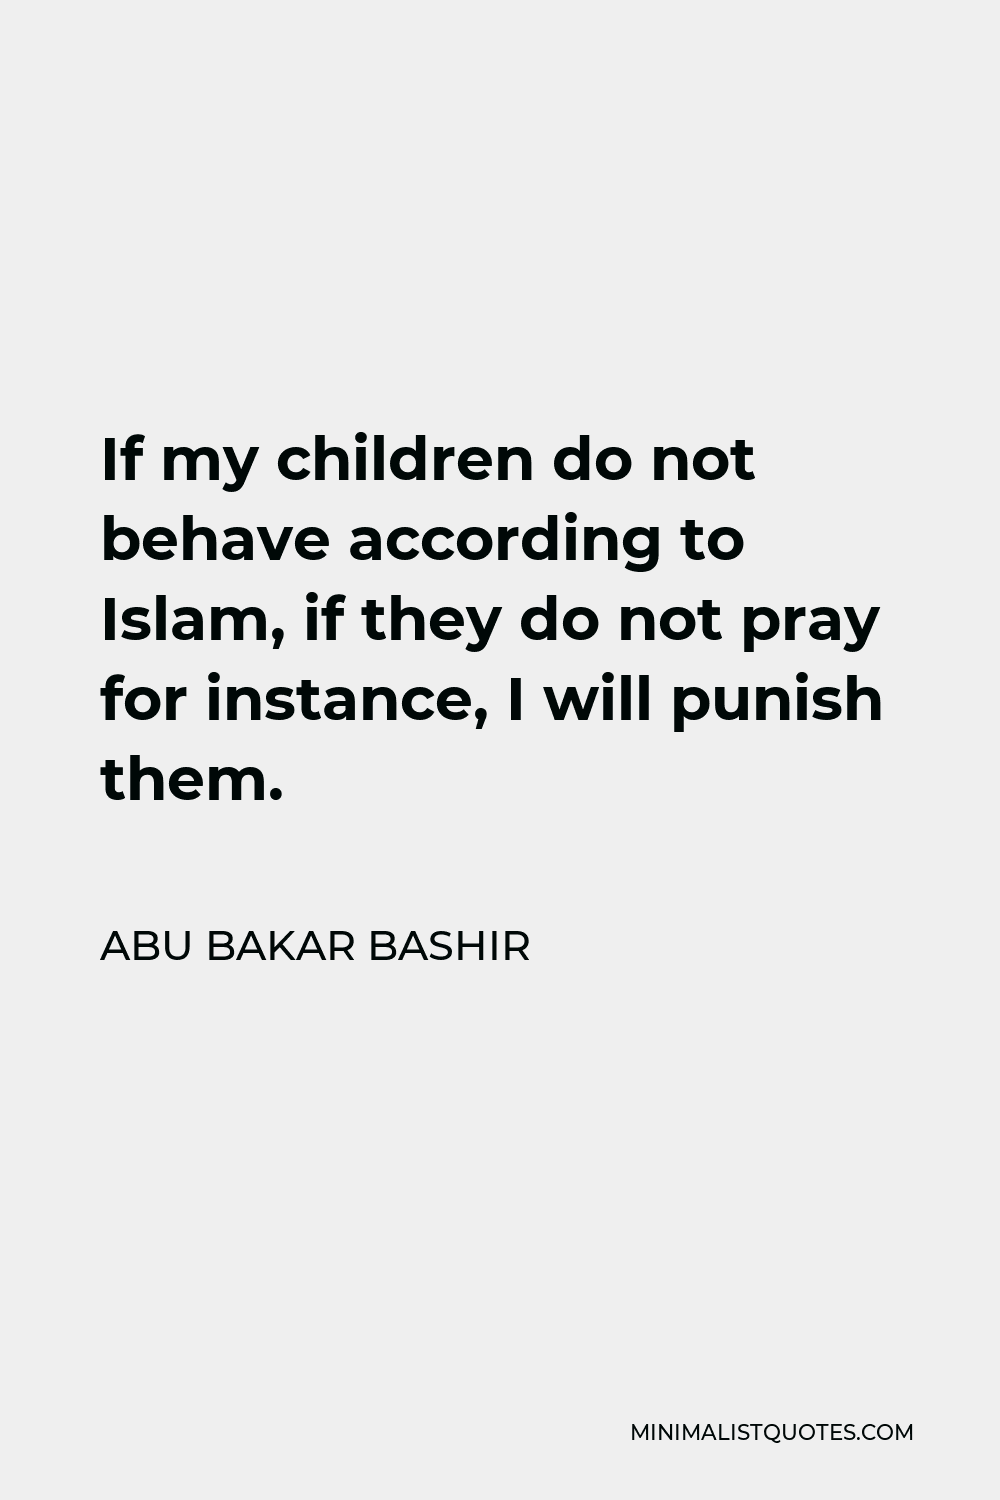 Abu Bakar Bashir Quote - If my children do not behave according to Islam, if they do not pray for instance, I will punish them.